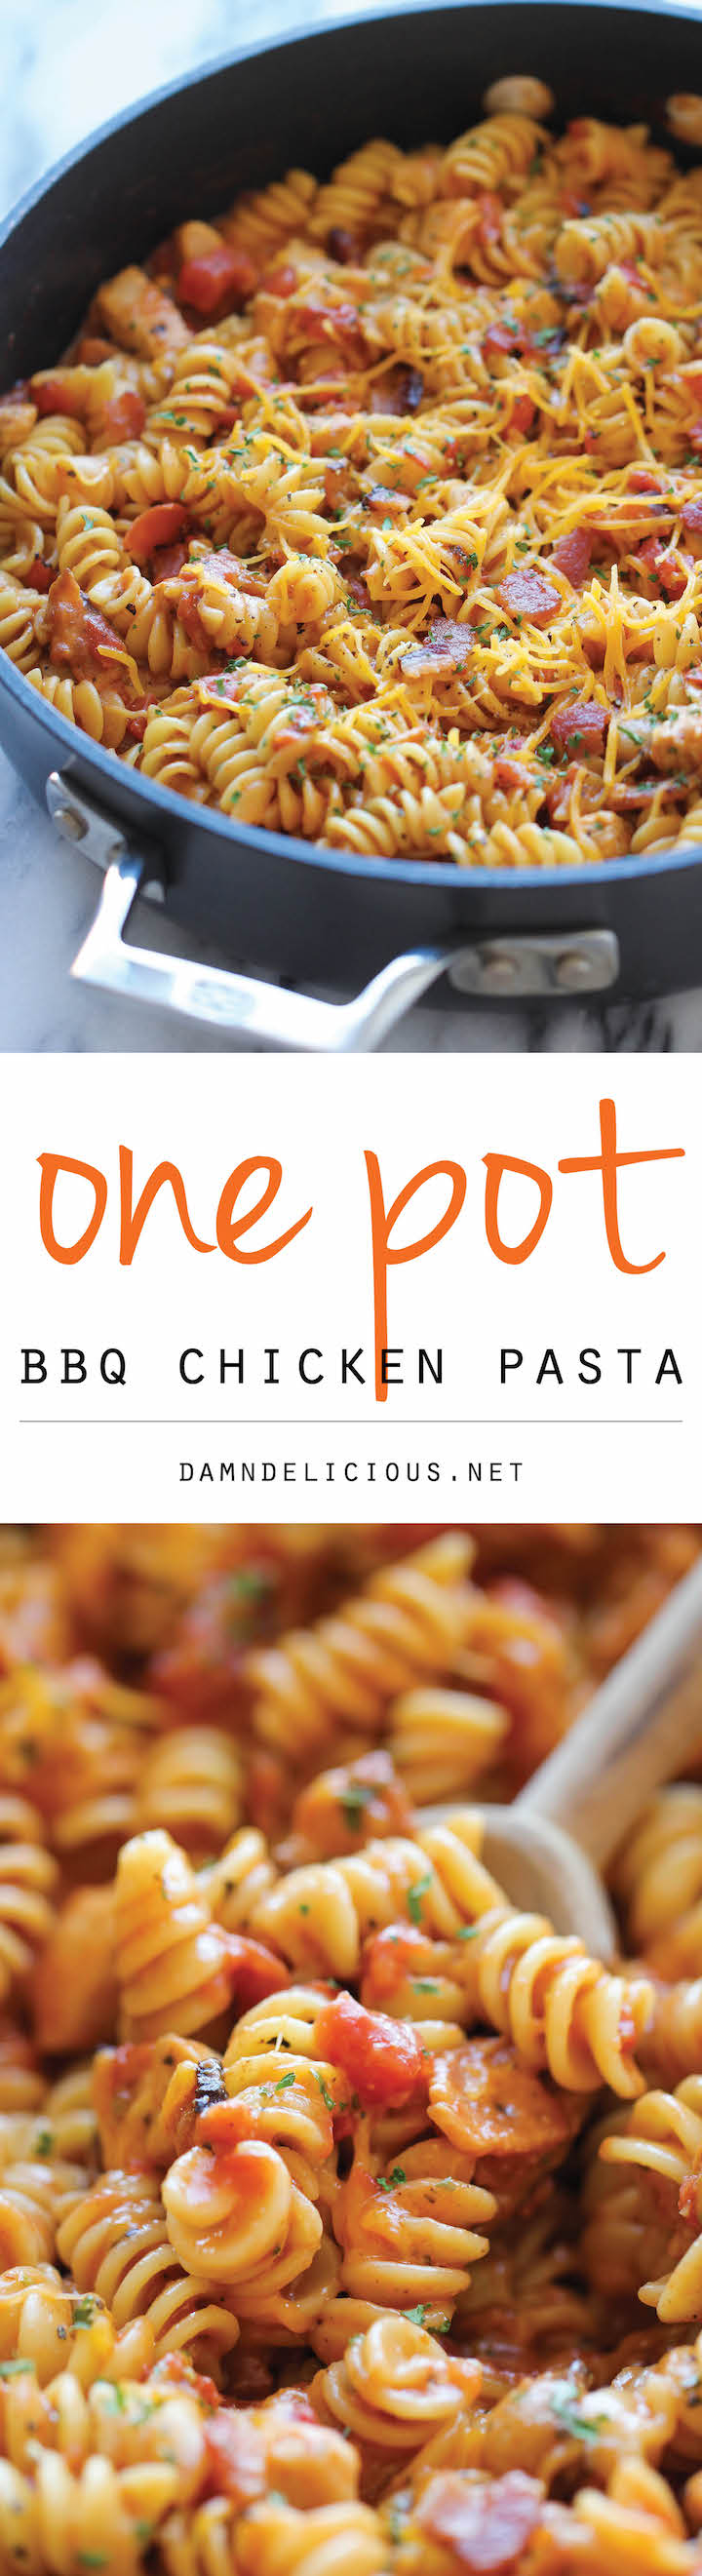 One Pot BBQ Chicken Pasta - A super easy one pot cheesy pasta dish loaded with tangy BBQ sauce and crisp bacon. Even the pasta gets cooked right in the pot!